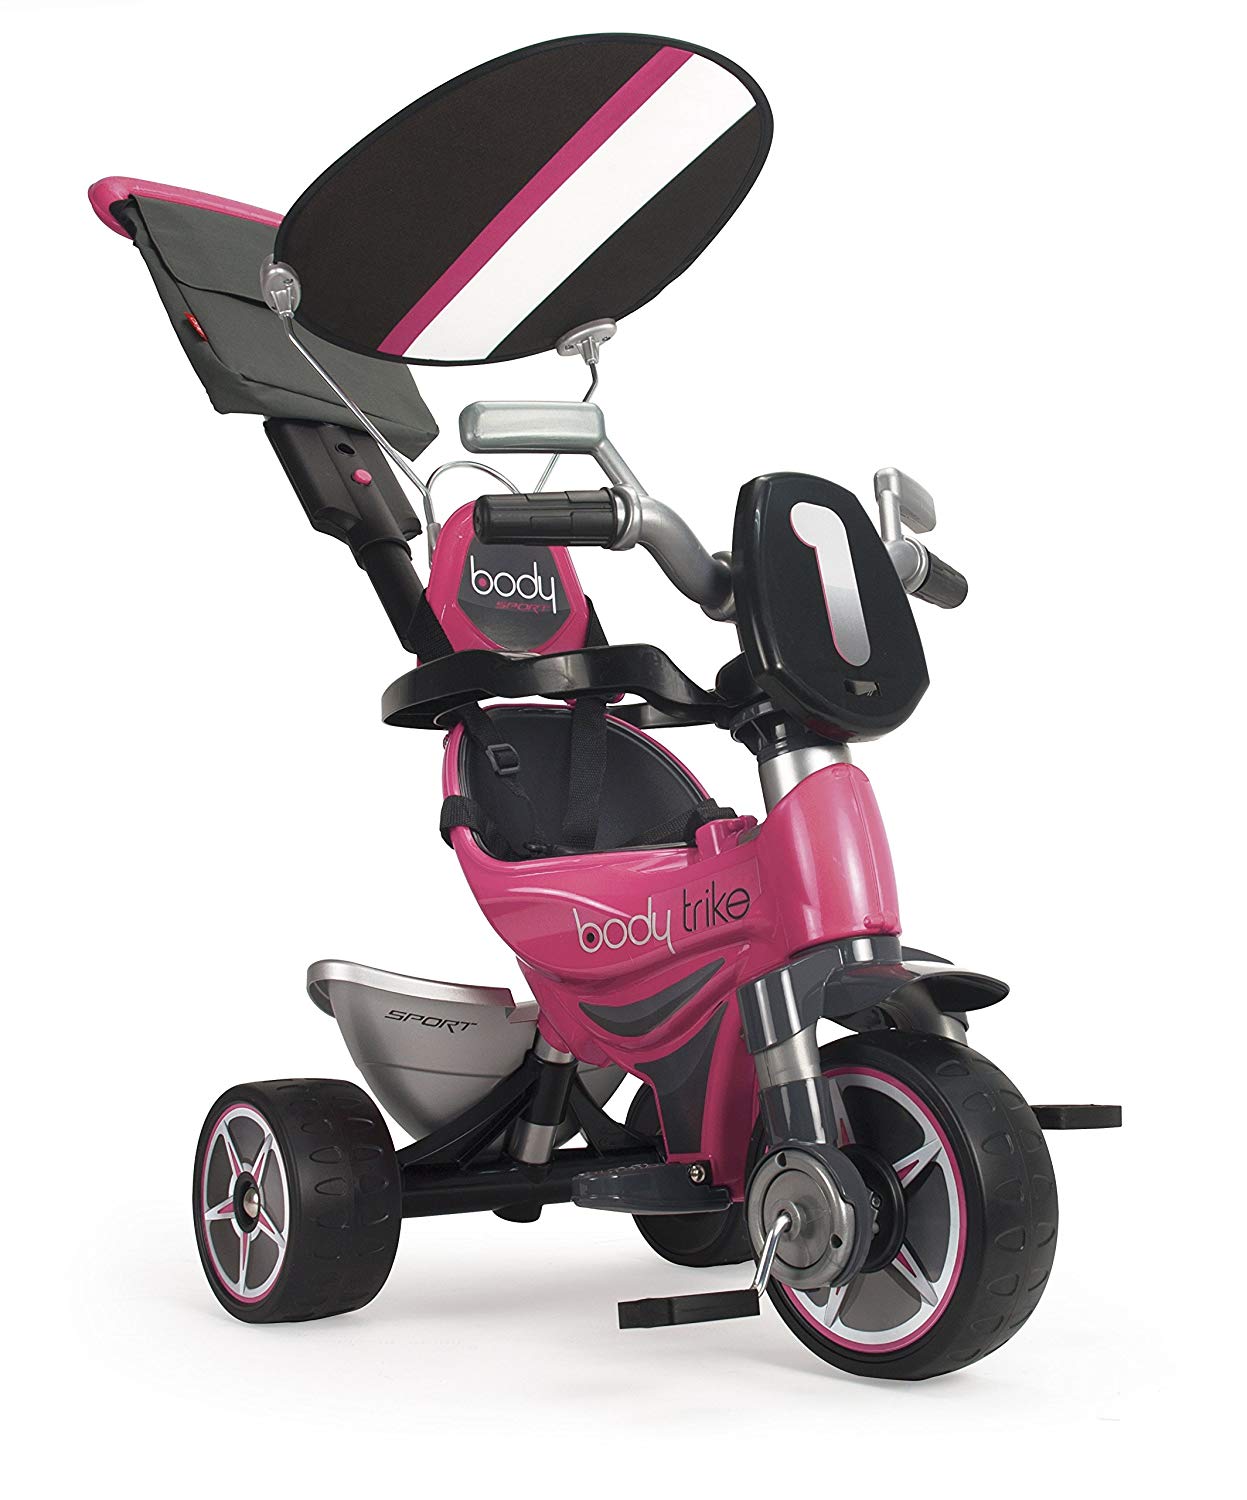 TRICICLO BODY COMPLETO ROSA 3252 - N30721